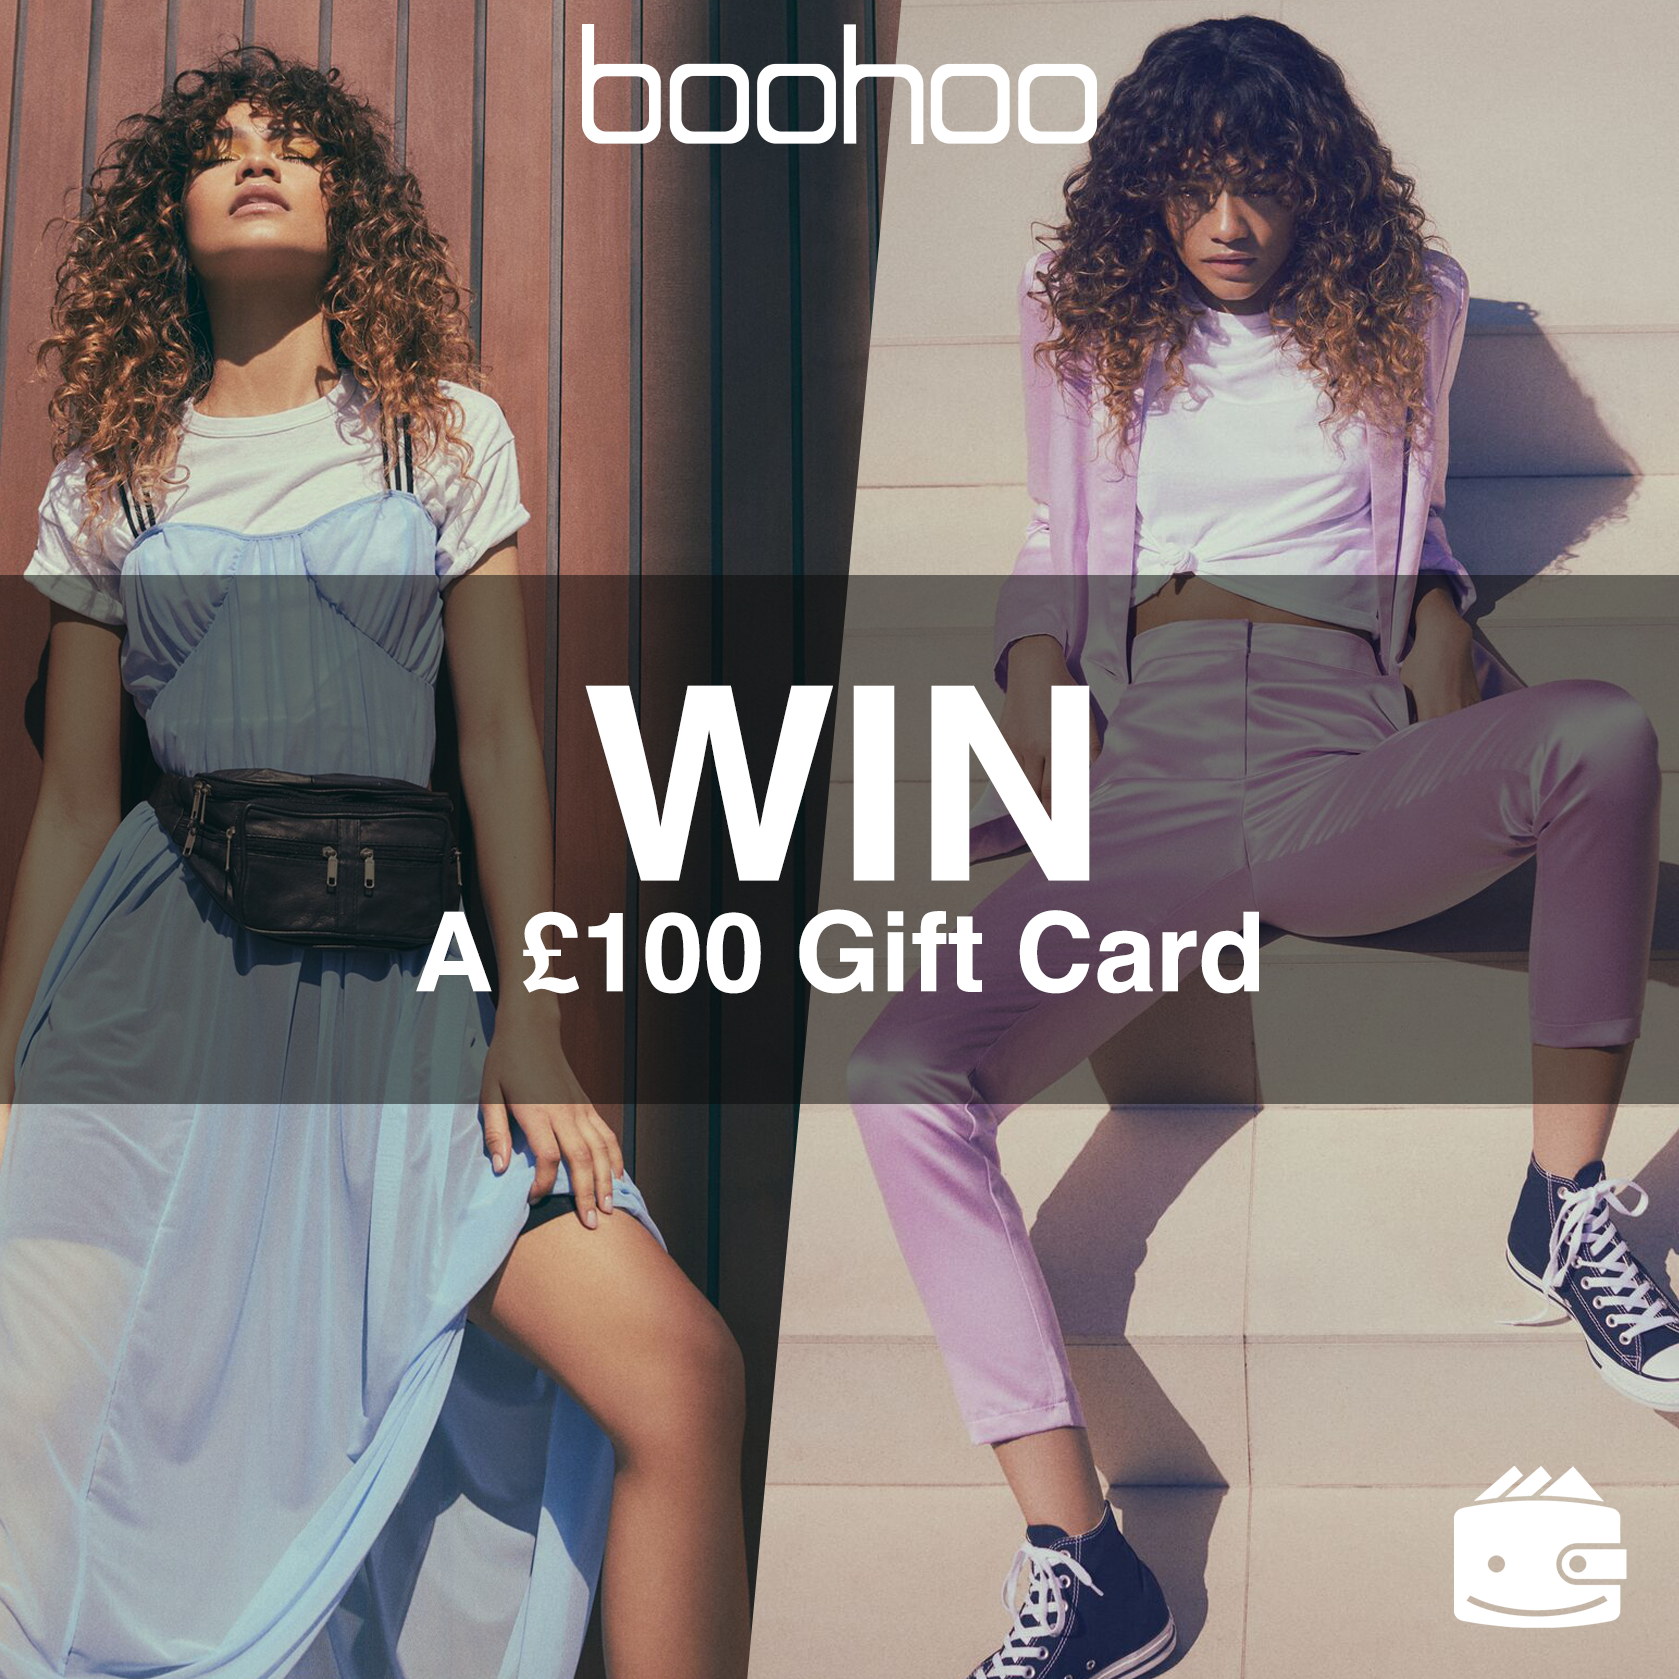 WIN A £100 Gift Card with Boohoo | My Voucher Codes